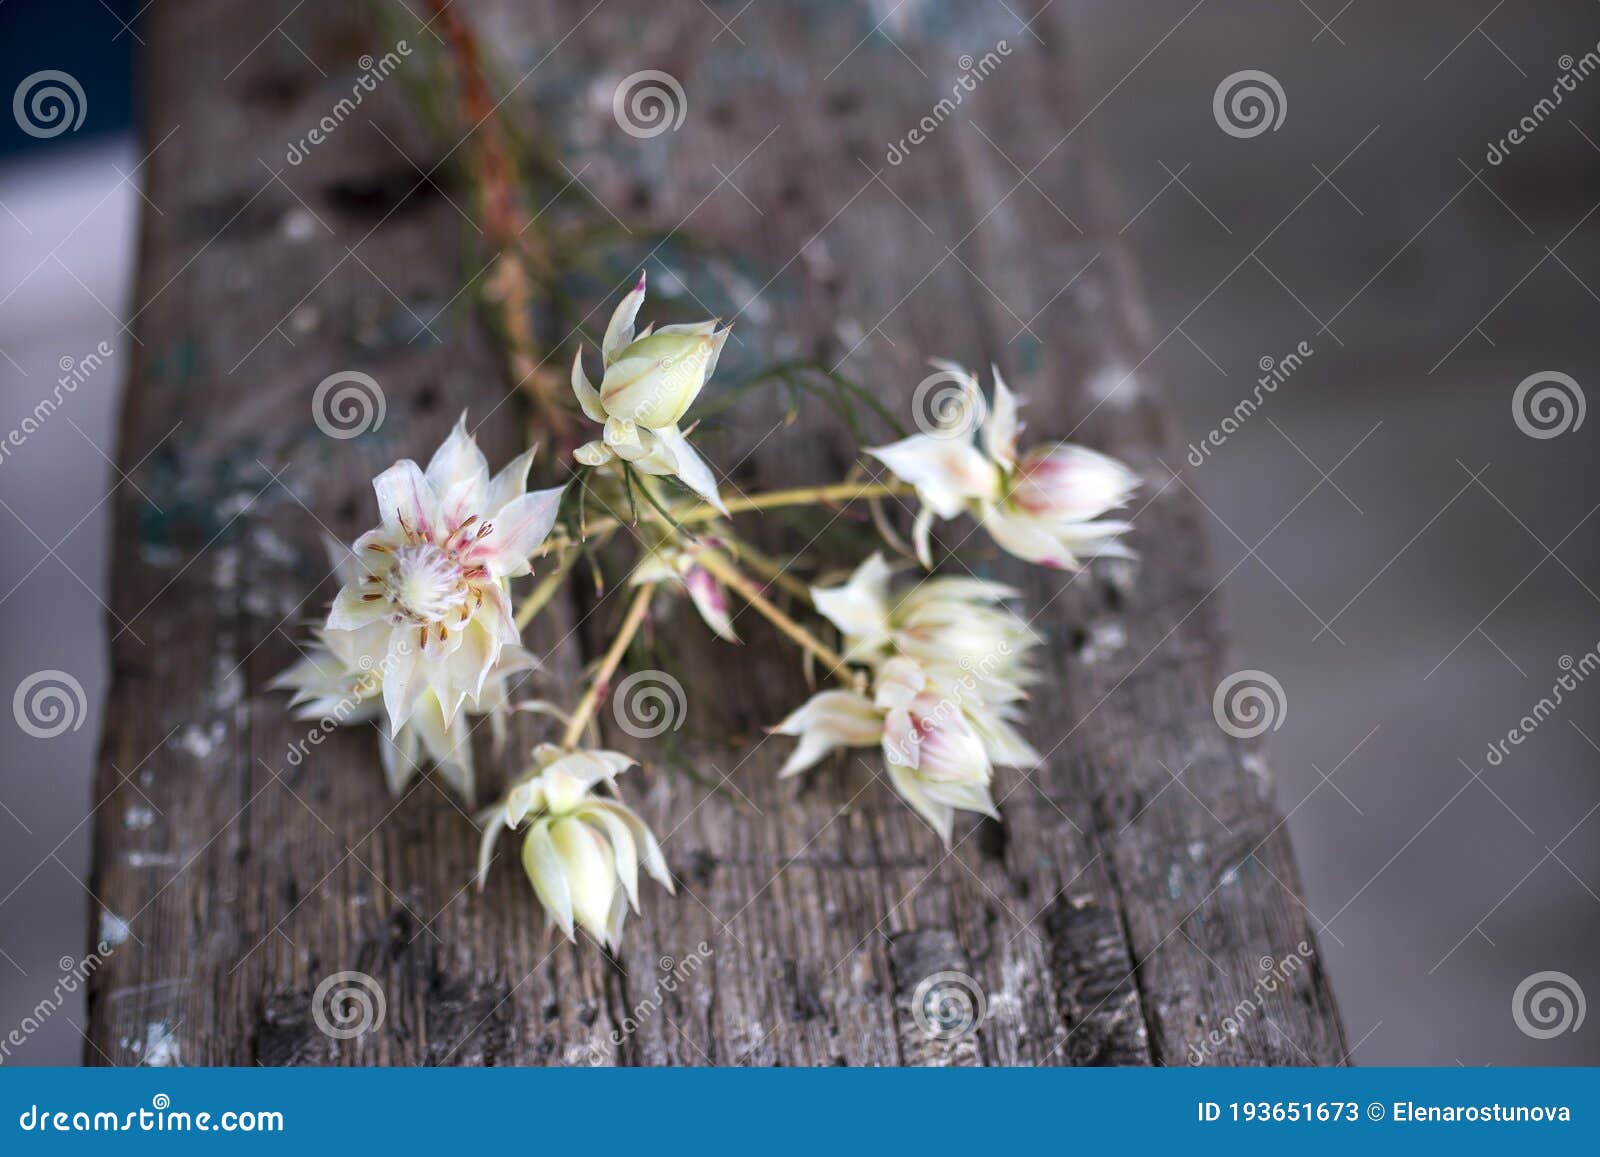 Protea Blushing Bride Flowers Stock Image - Image of petal, color: 193651673